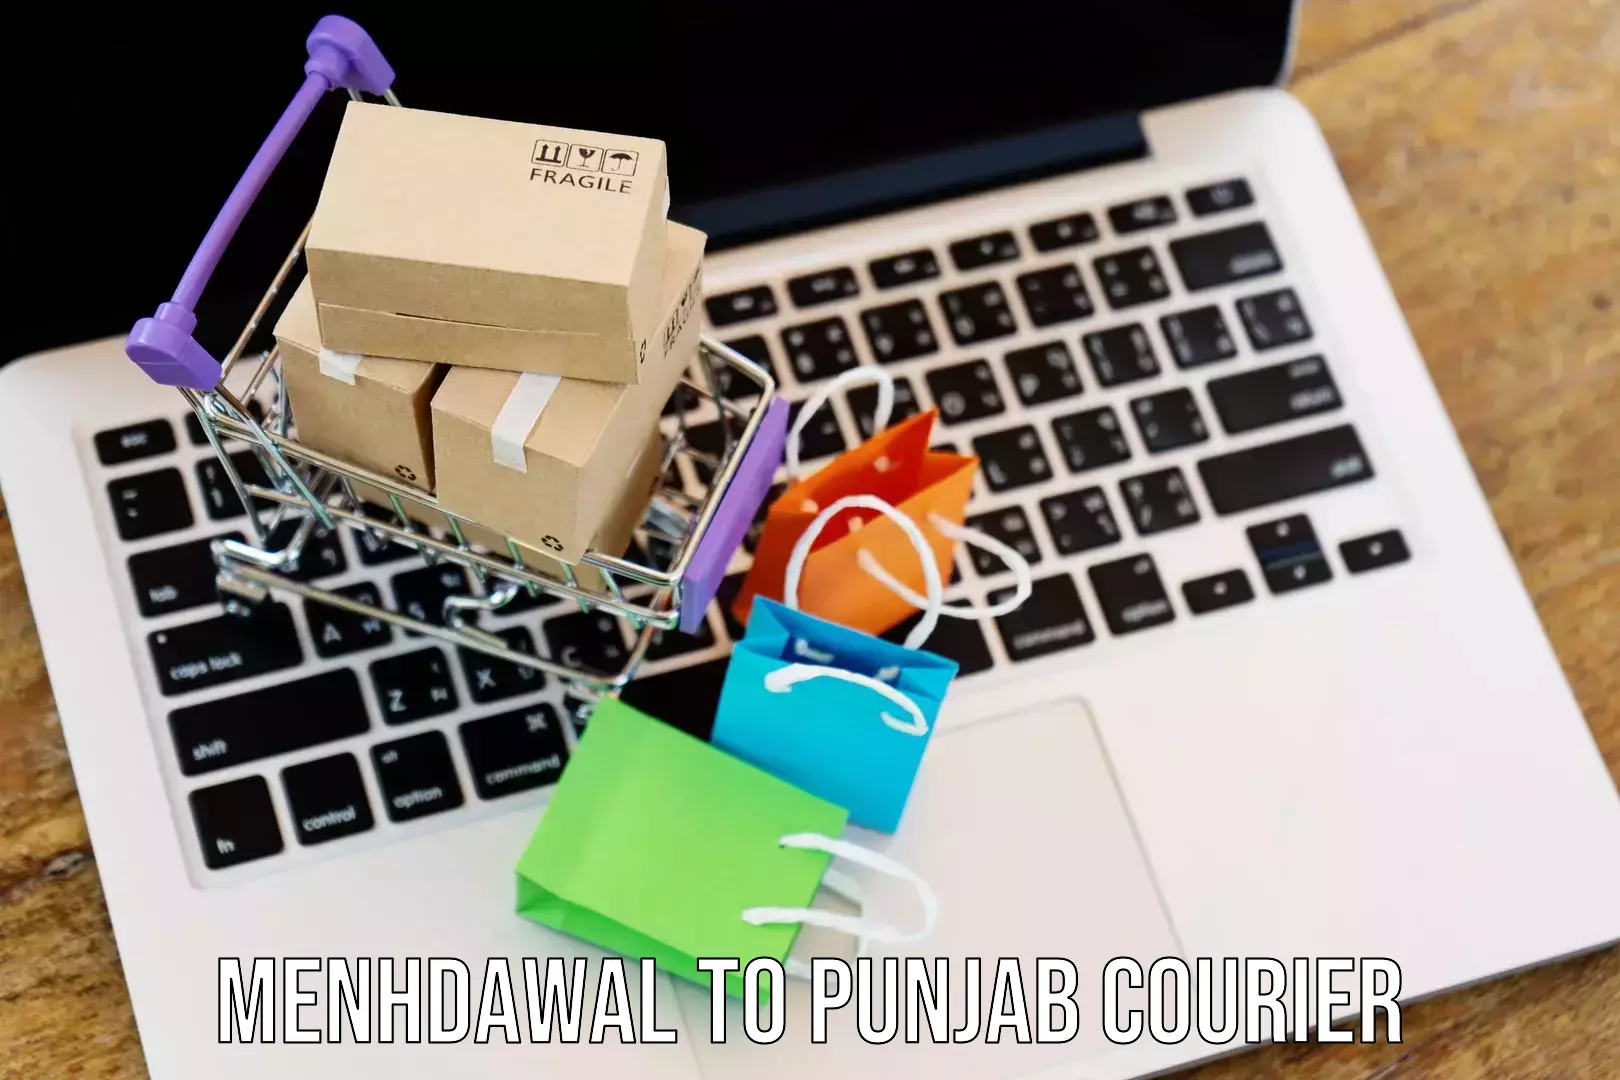 On-time delivery services Menhdawal to Central University of Punjab Bathinda